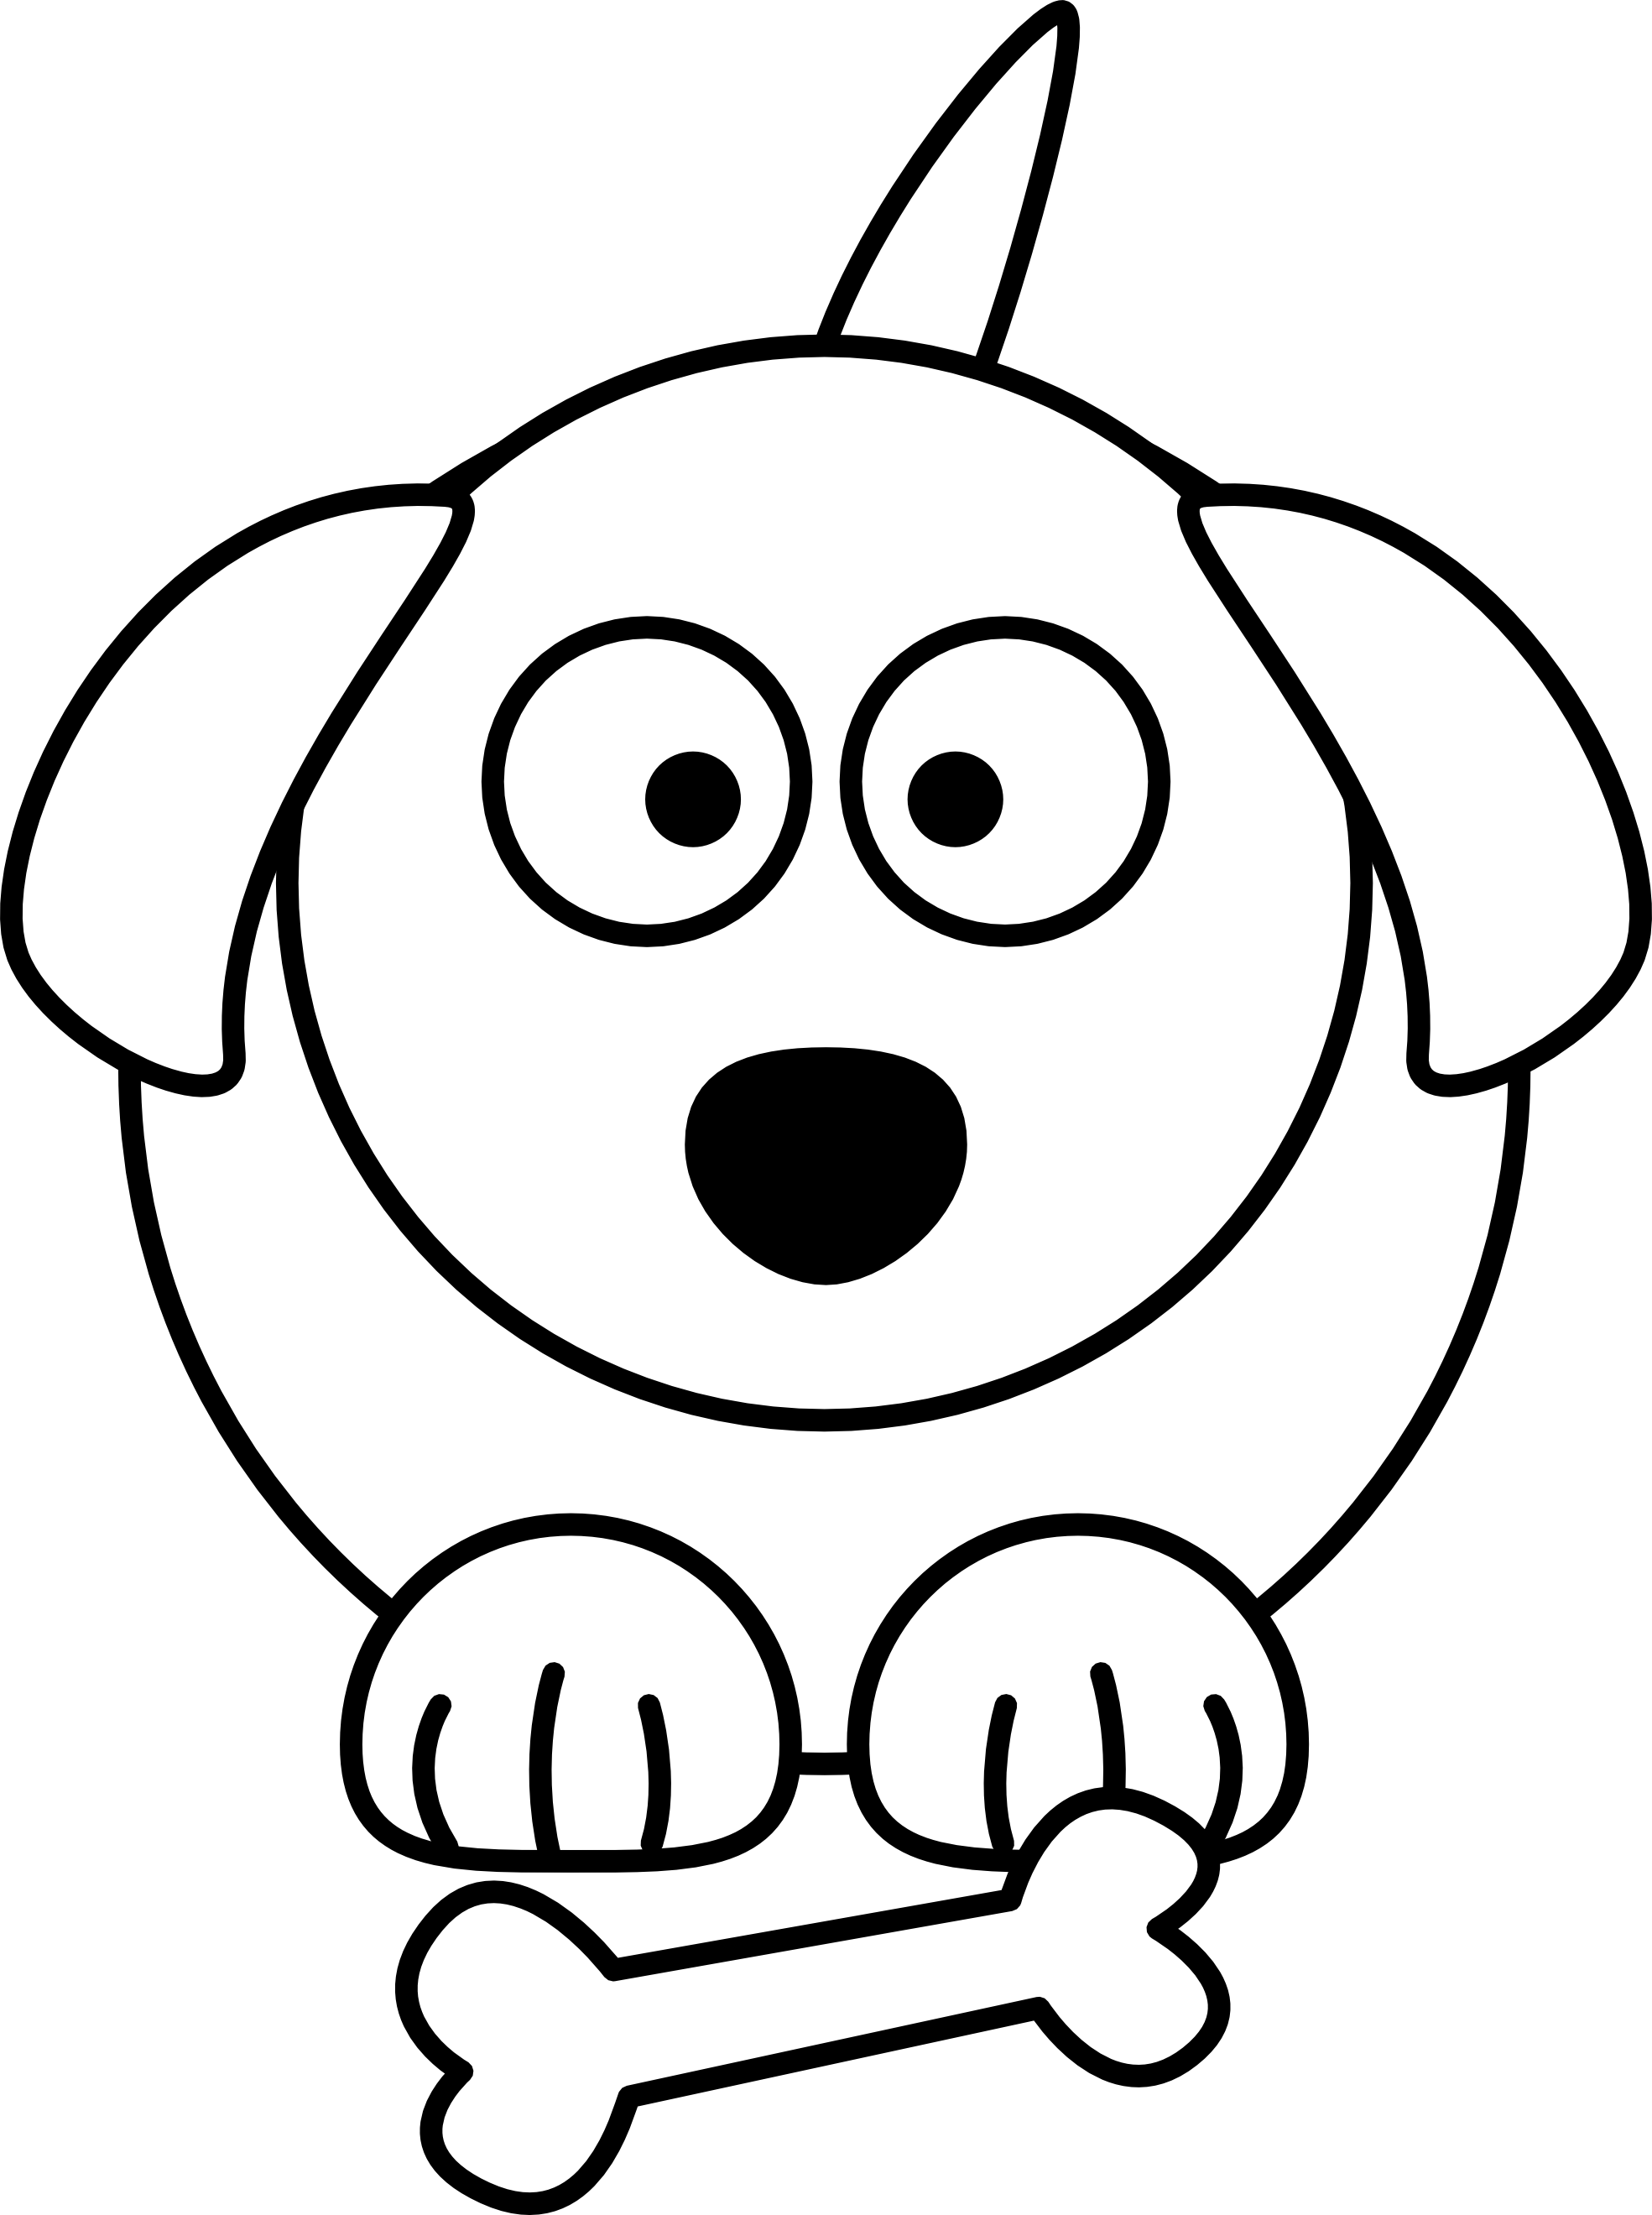 Drawing Of A Cartoon Dog - Clipart library